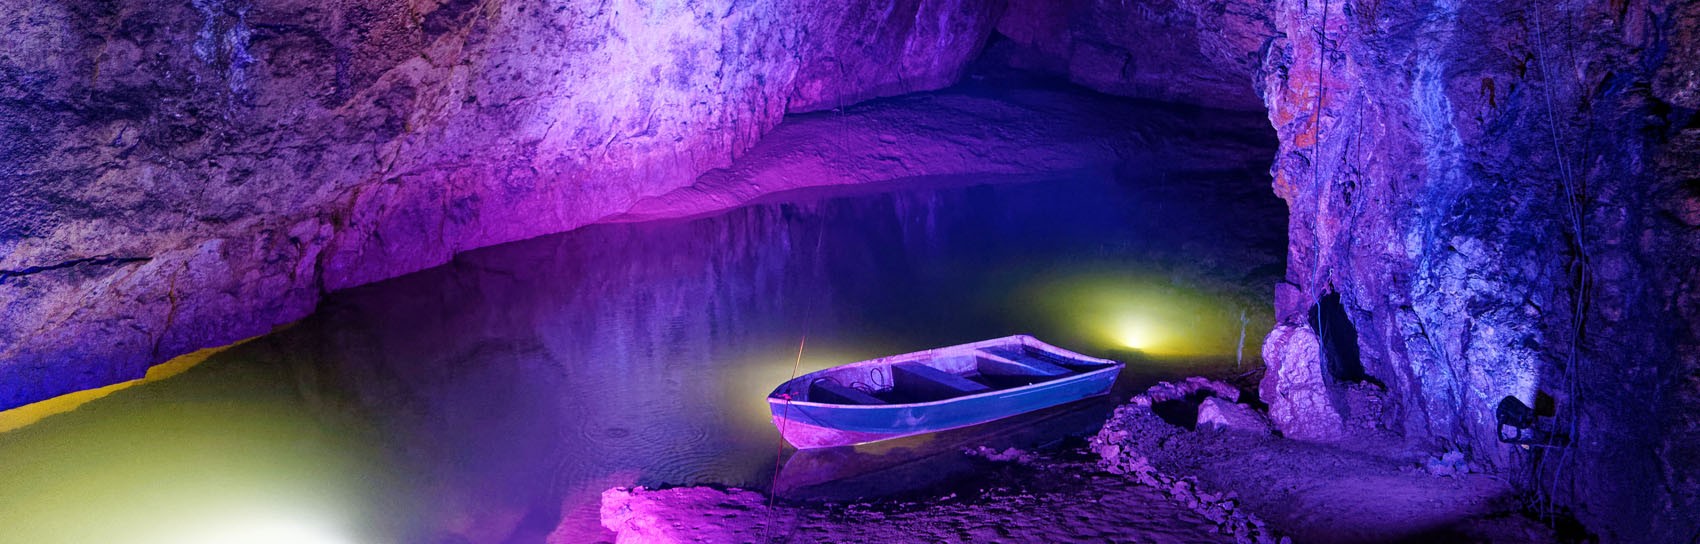 Wookey Hole in Somerset. Photograph by SHREYAS CHANDARIA